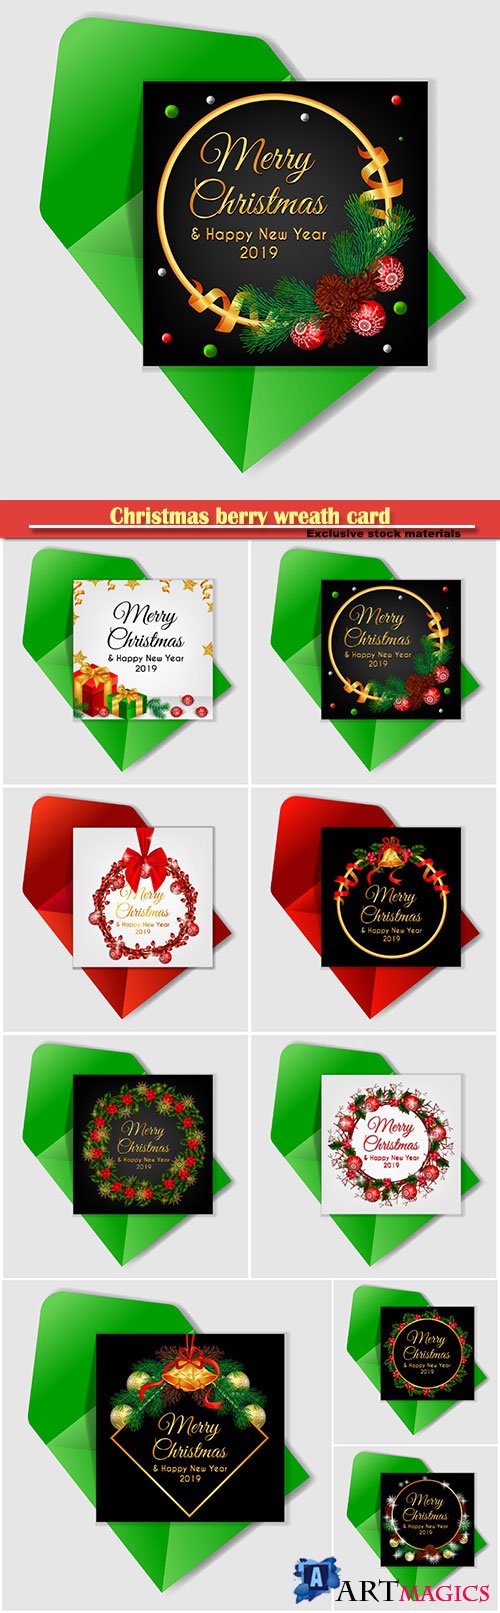 Christmas berry wreath card with jingle bell and red ribbon